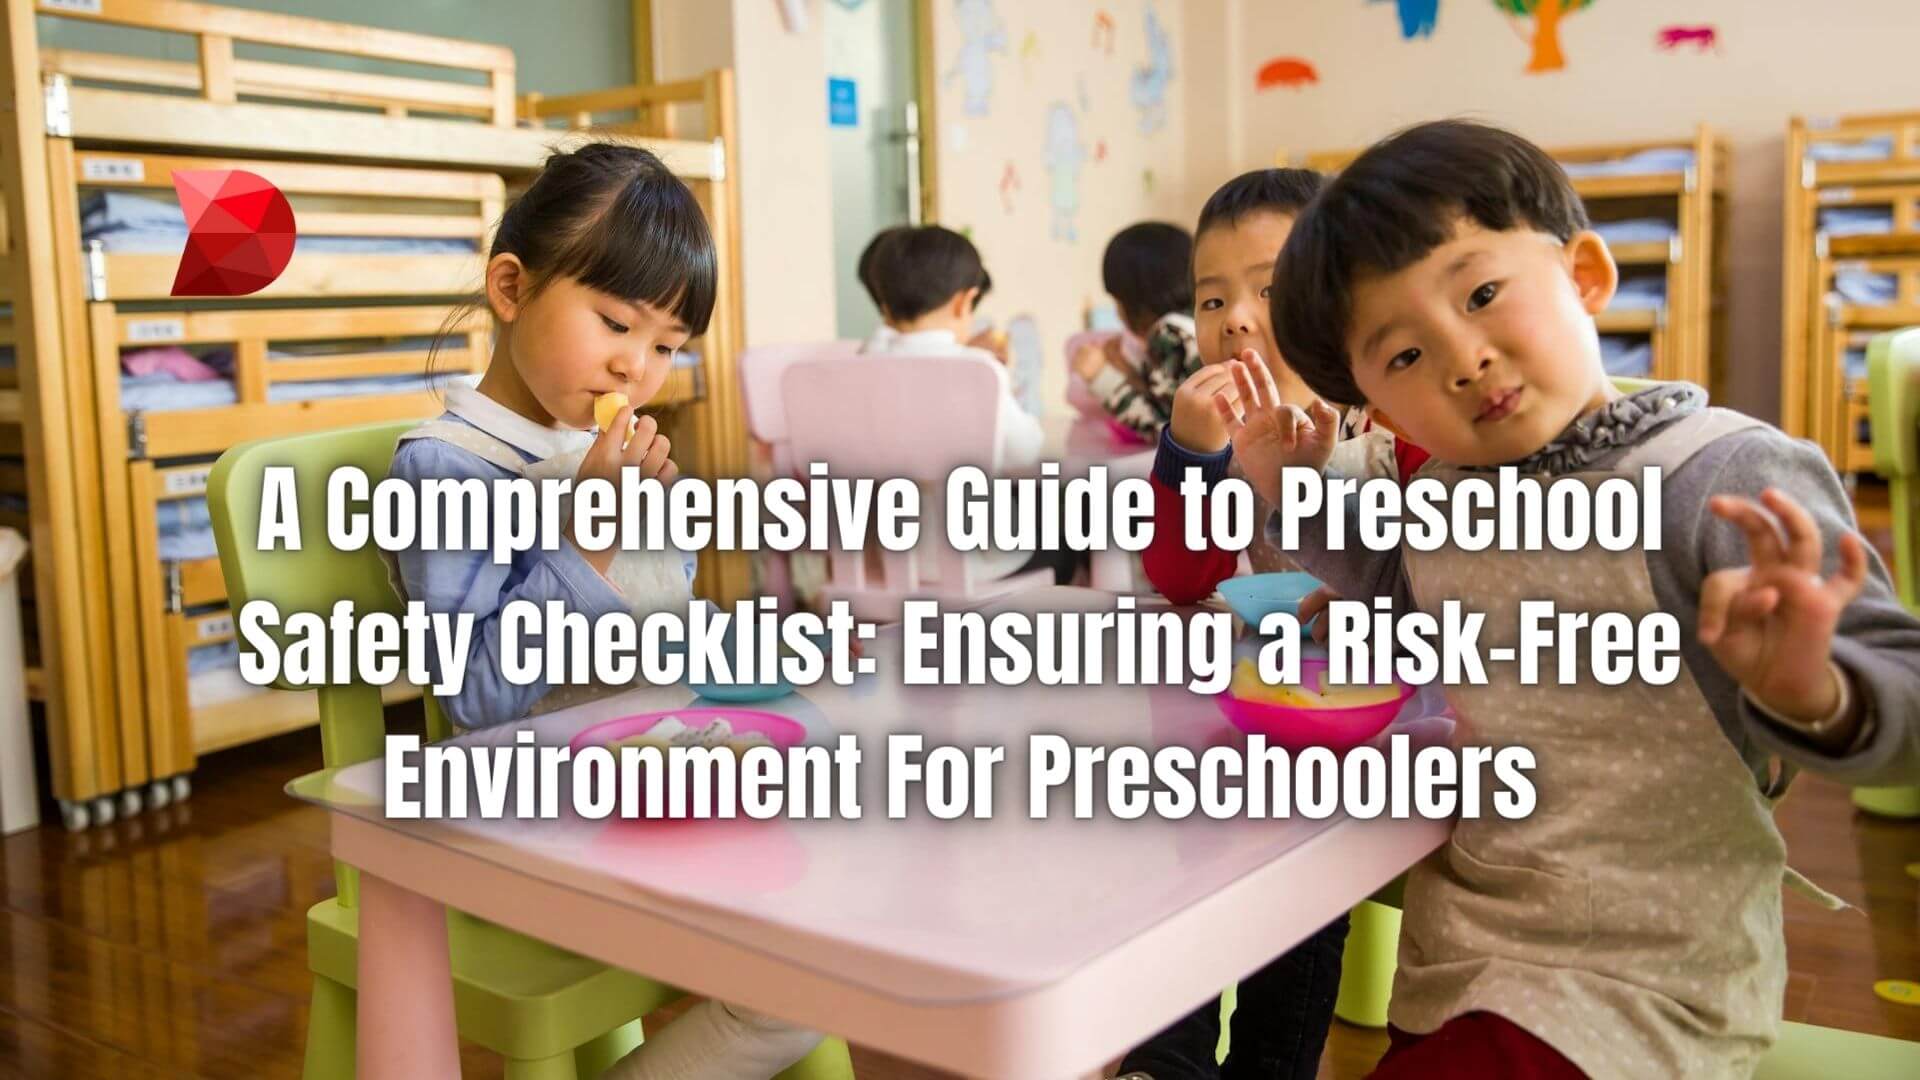 Safeguard your child's well-being! Click here to discover the ultimate preschool classroom safety checklist for a secure environment.